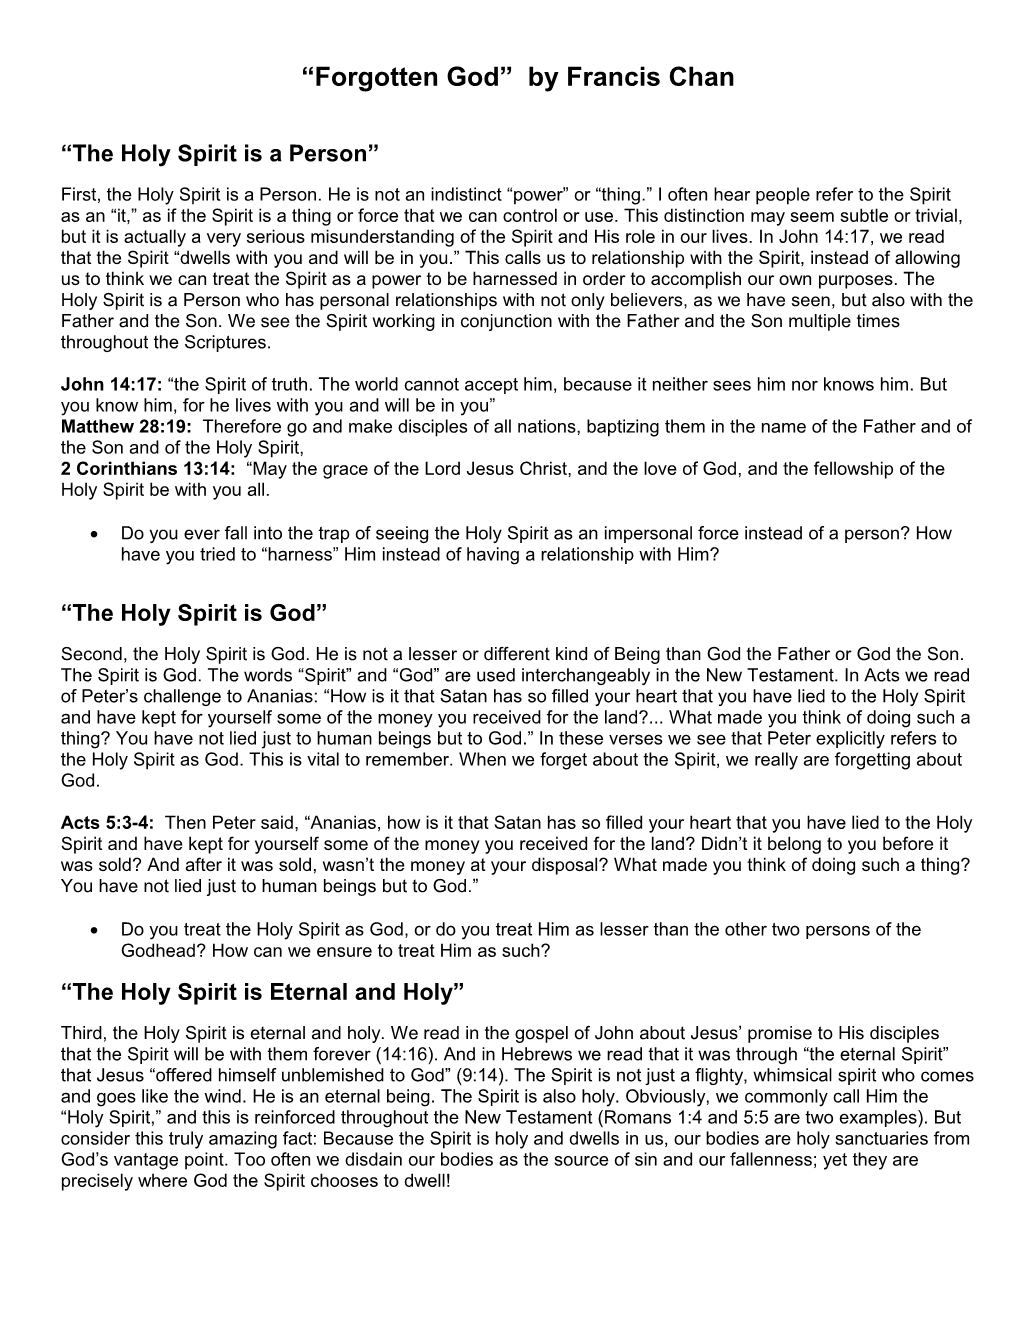 The Holy Spirit Is a Person